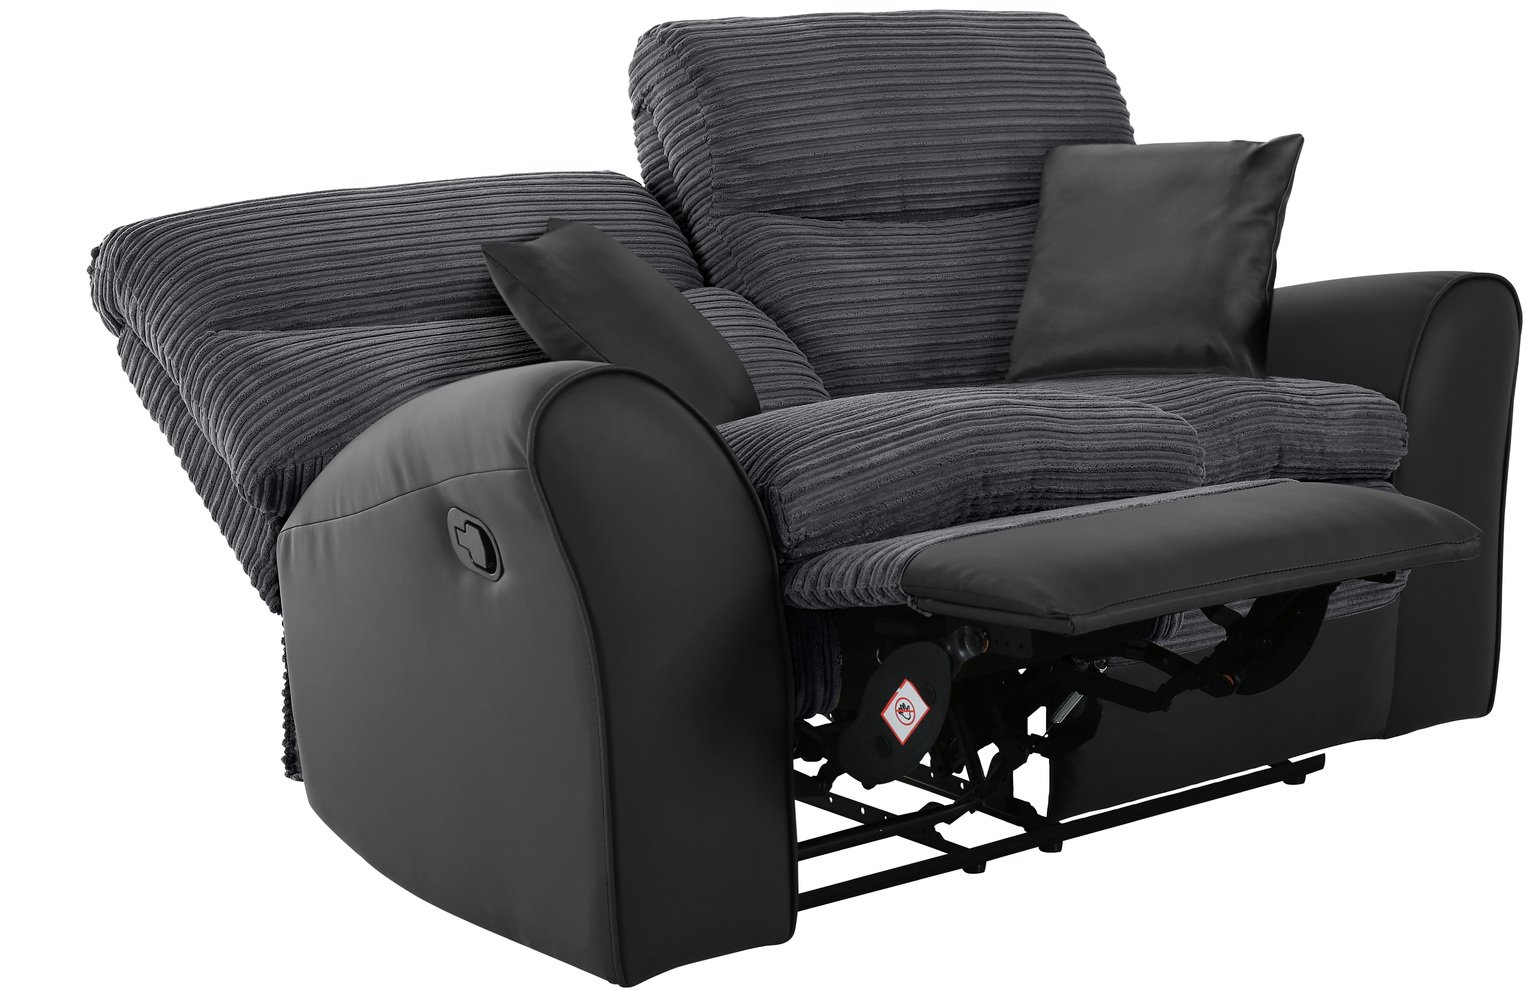 Argos Home Harry 2 Seater Fabric Recliner Sofa - Charcoal